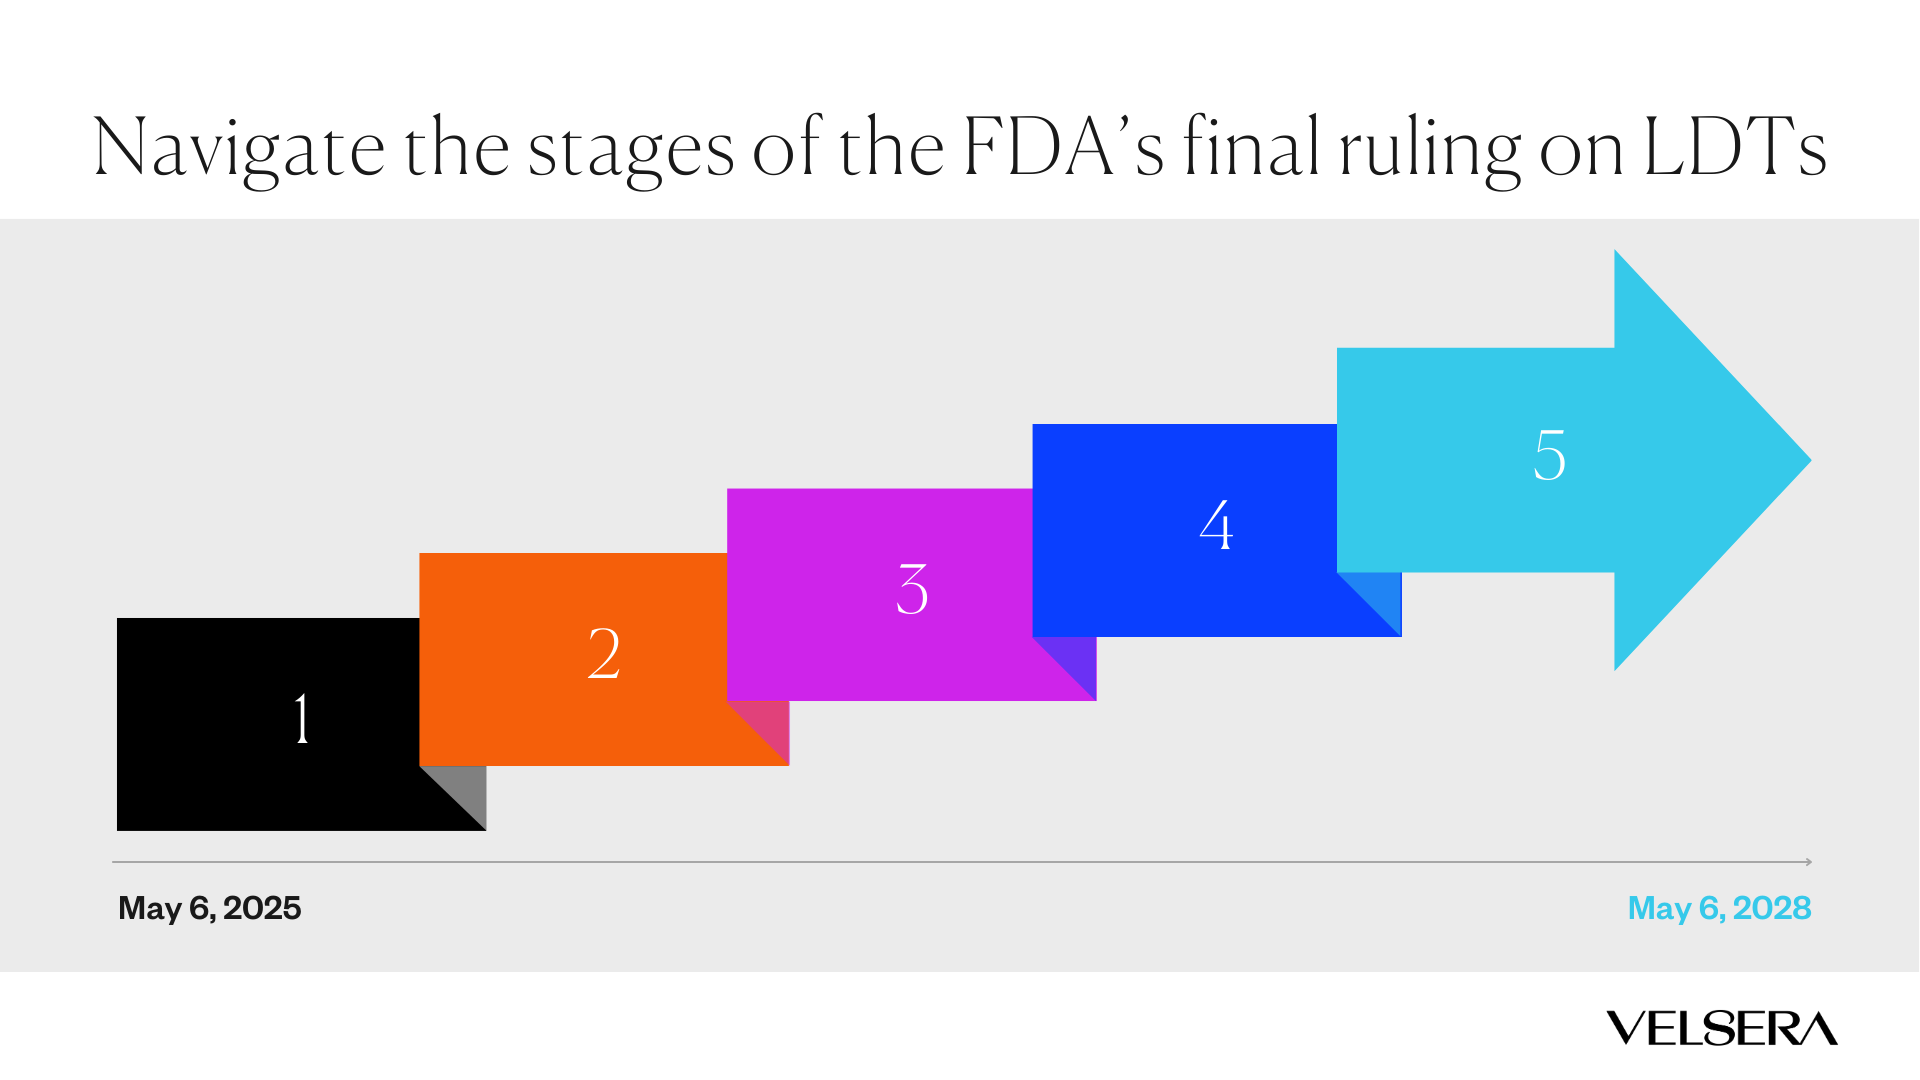 Four Years, Five Stages: What the FDA's Final Rule on LDTs Means for Complex Molecular Diagnostic Testing